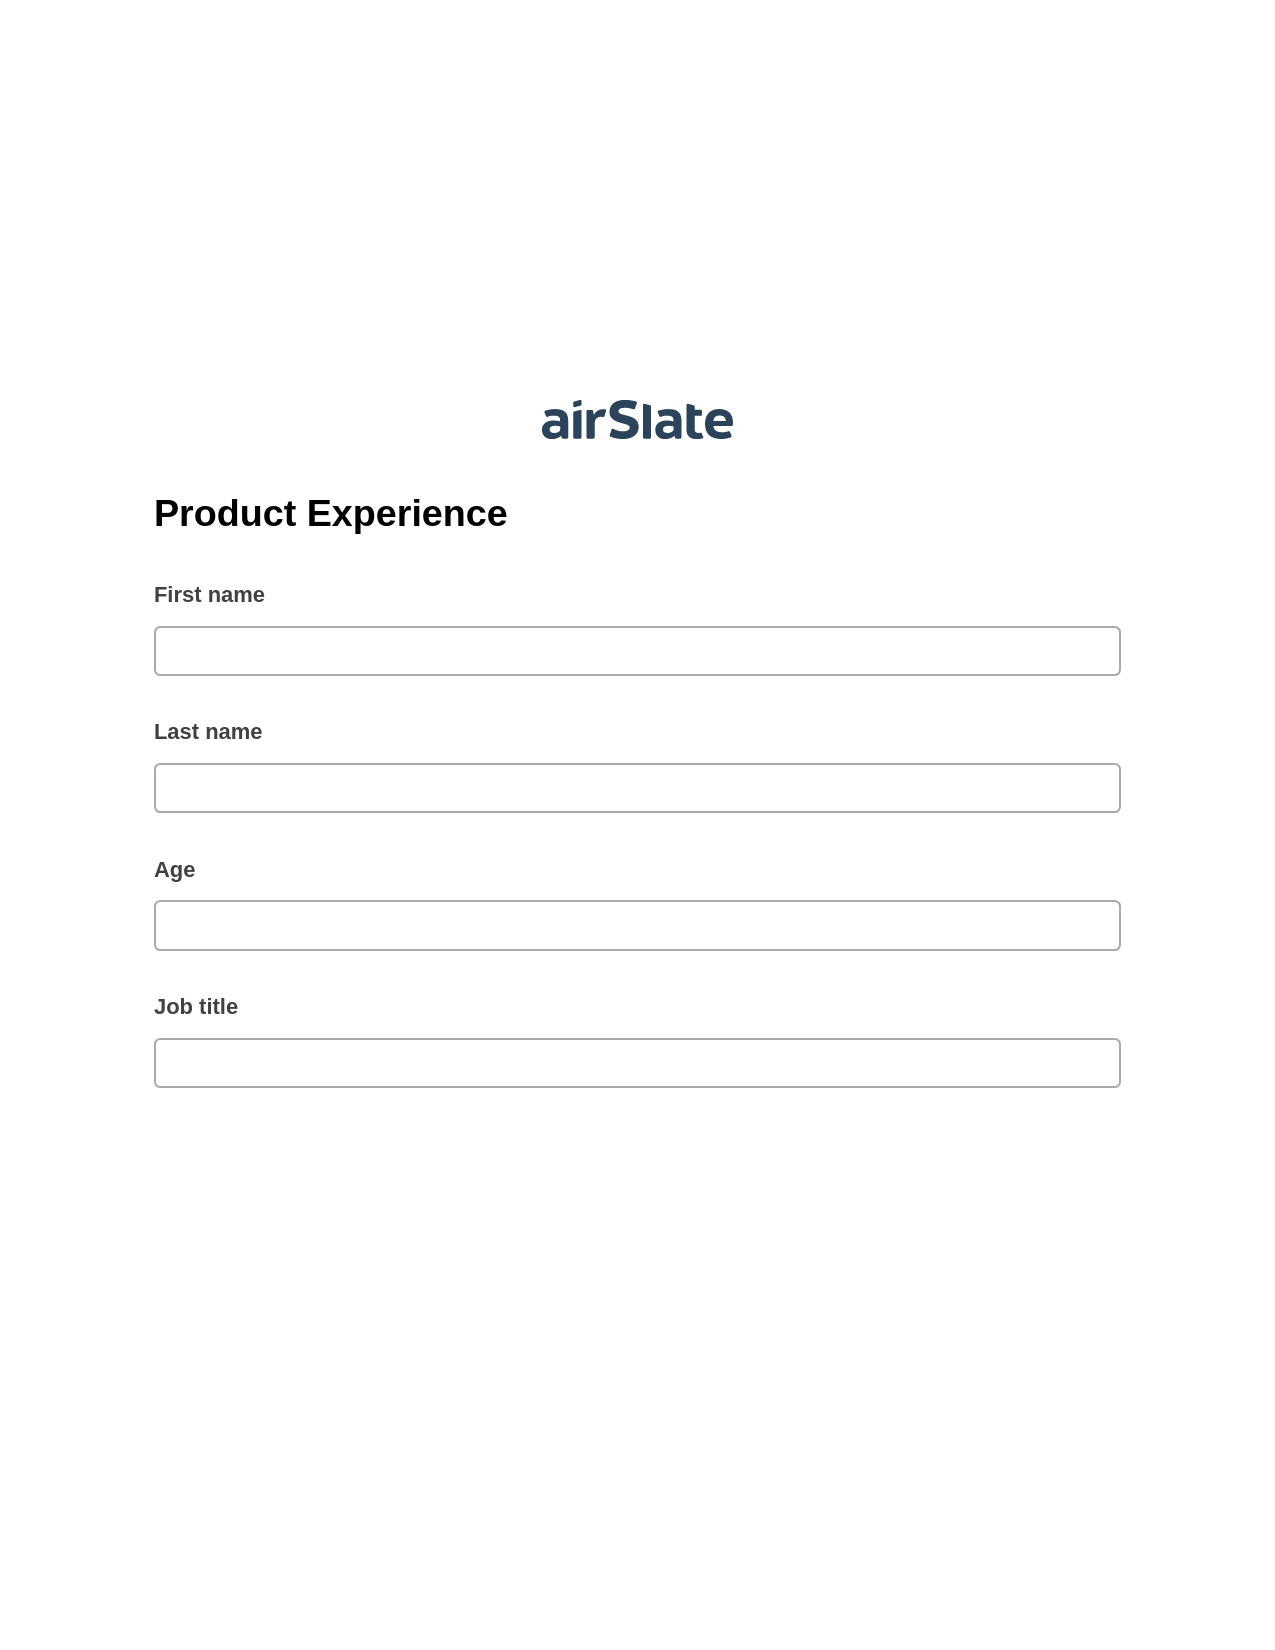 Product Experience Pre-fill from another Slate Bot, Create slate from another Flow Bot, Export to Excel 365 Bot